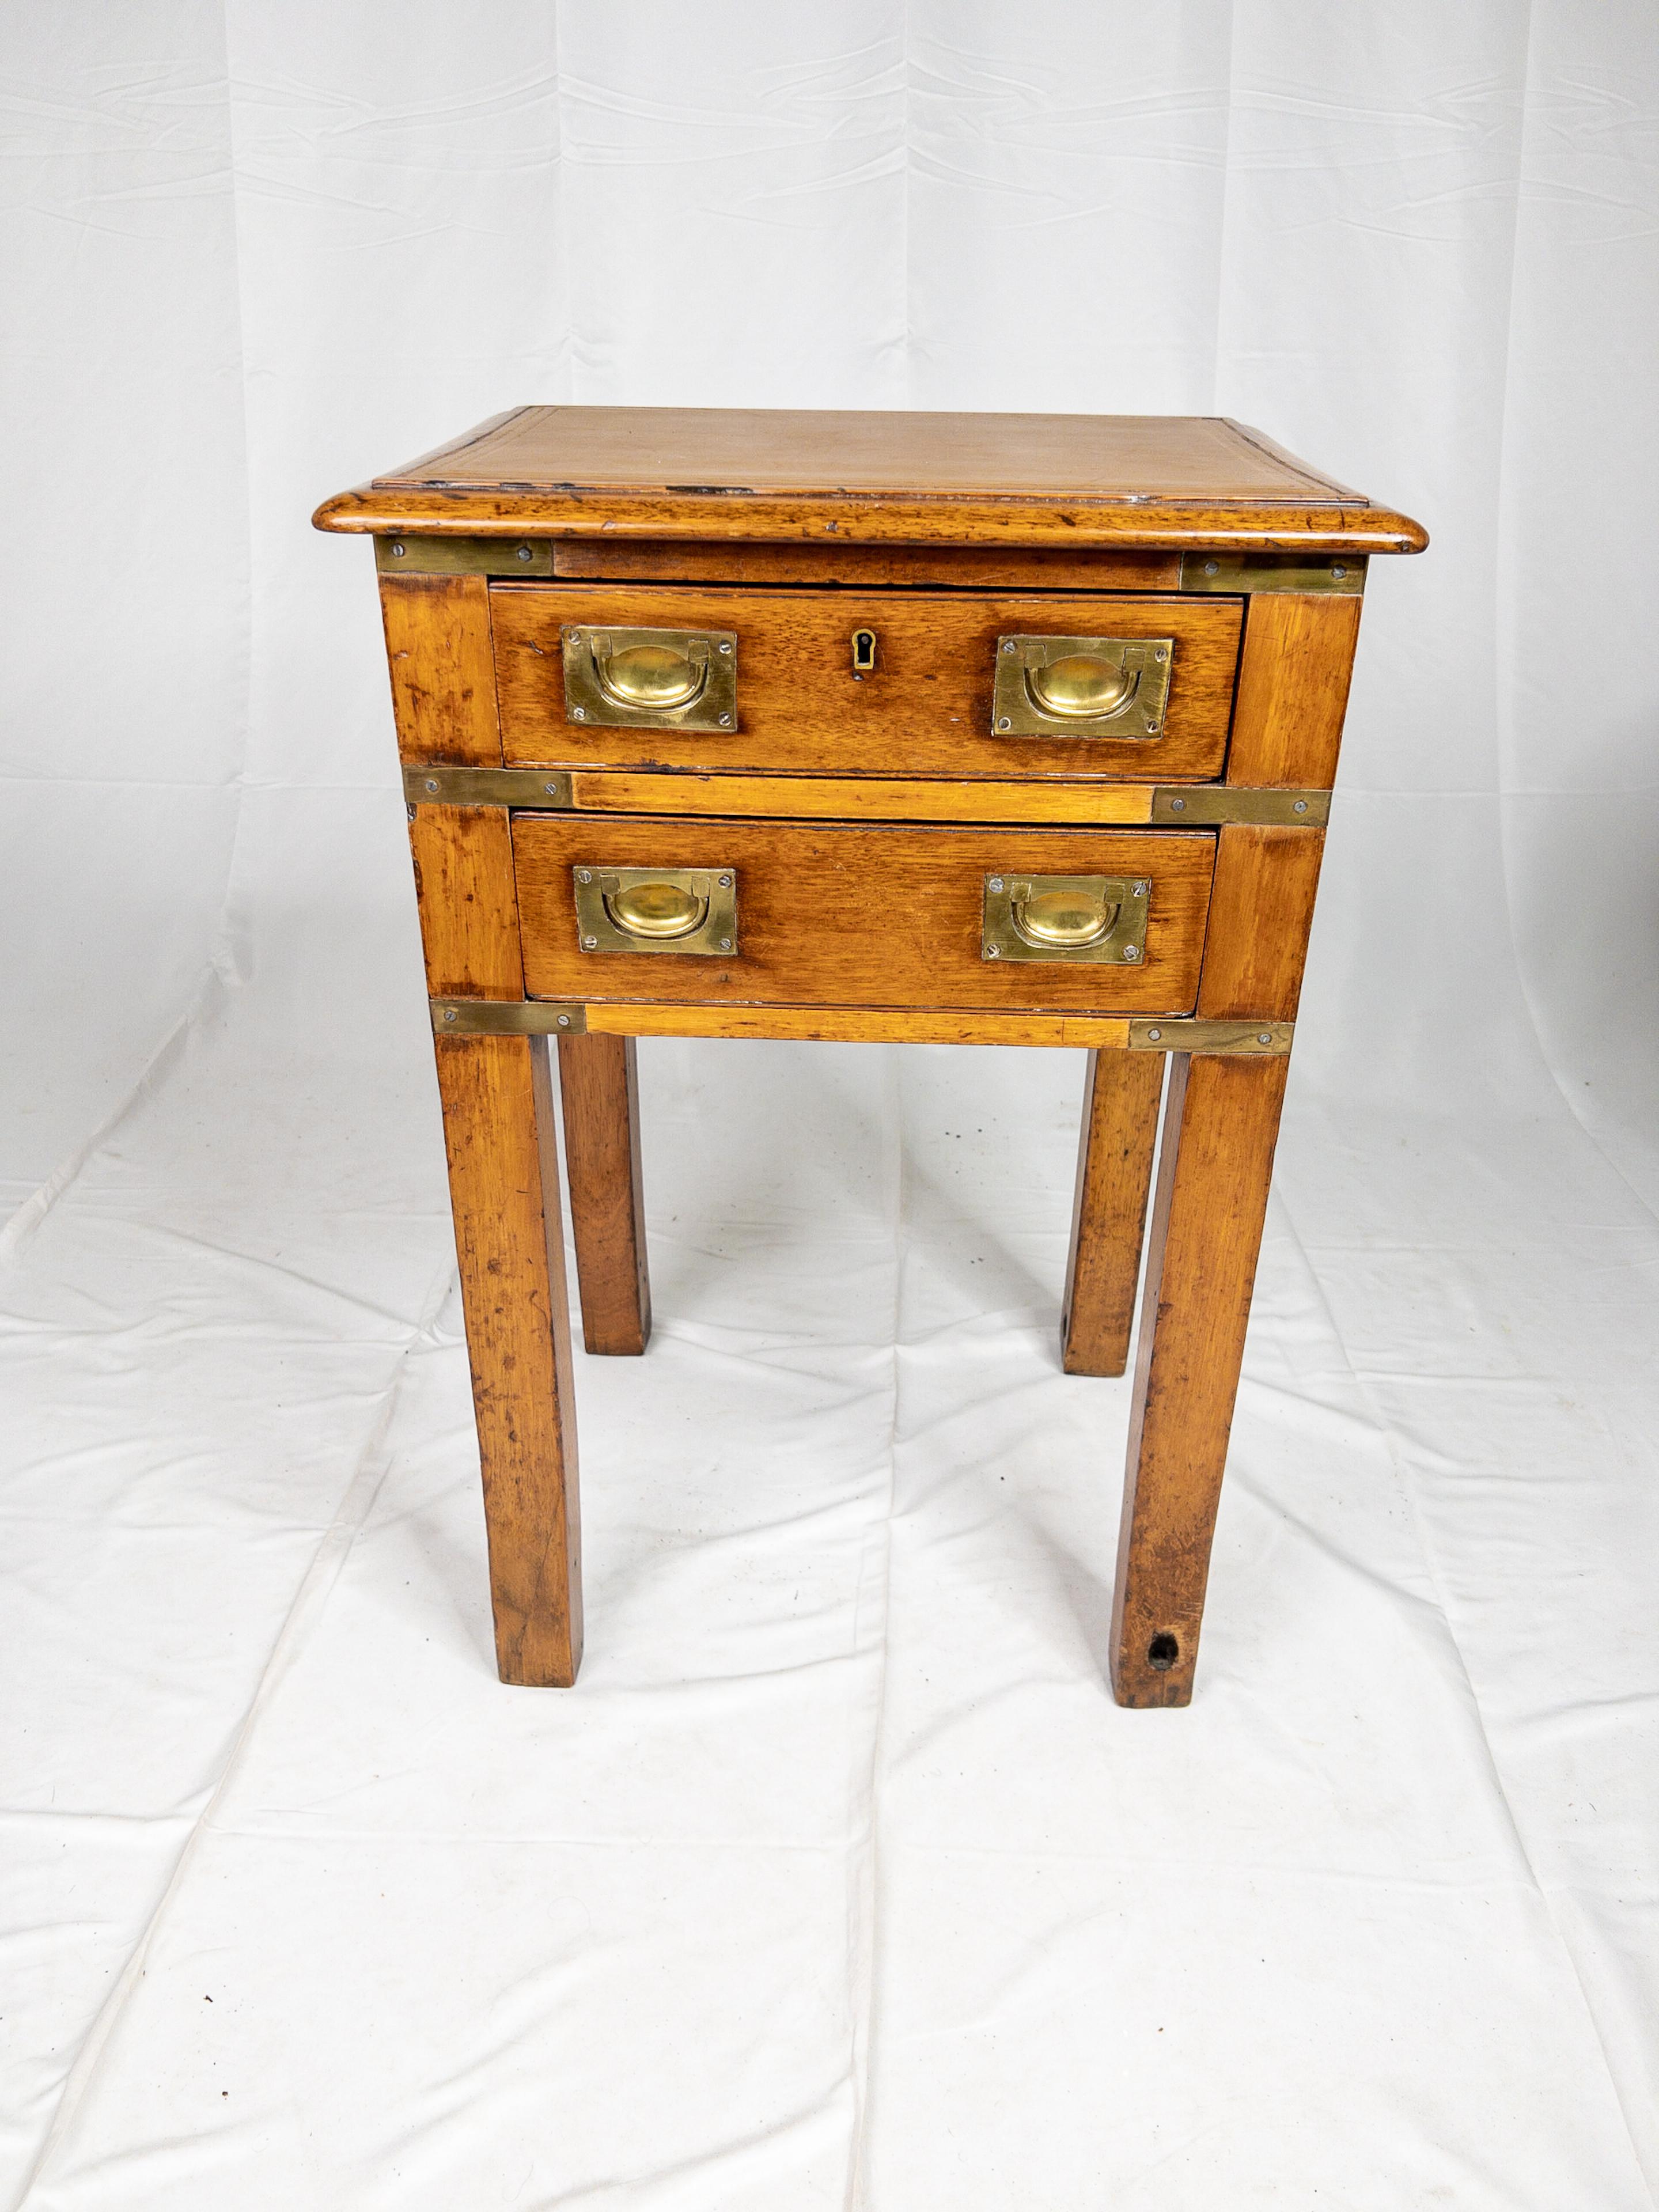 The Rare 19th Century French Campaign Chest on Legs is a remarkable piece of furniture that embodies both functionality and elegance. Crafted during the 19th century, it reflects the impeccable craftsmanship of the time. This unique chest stands out